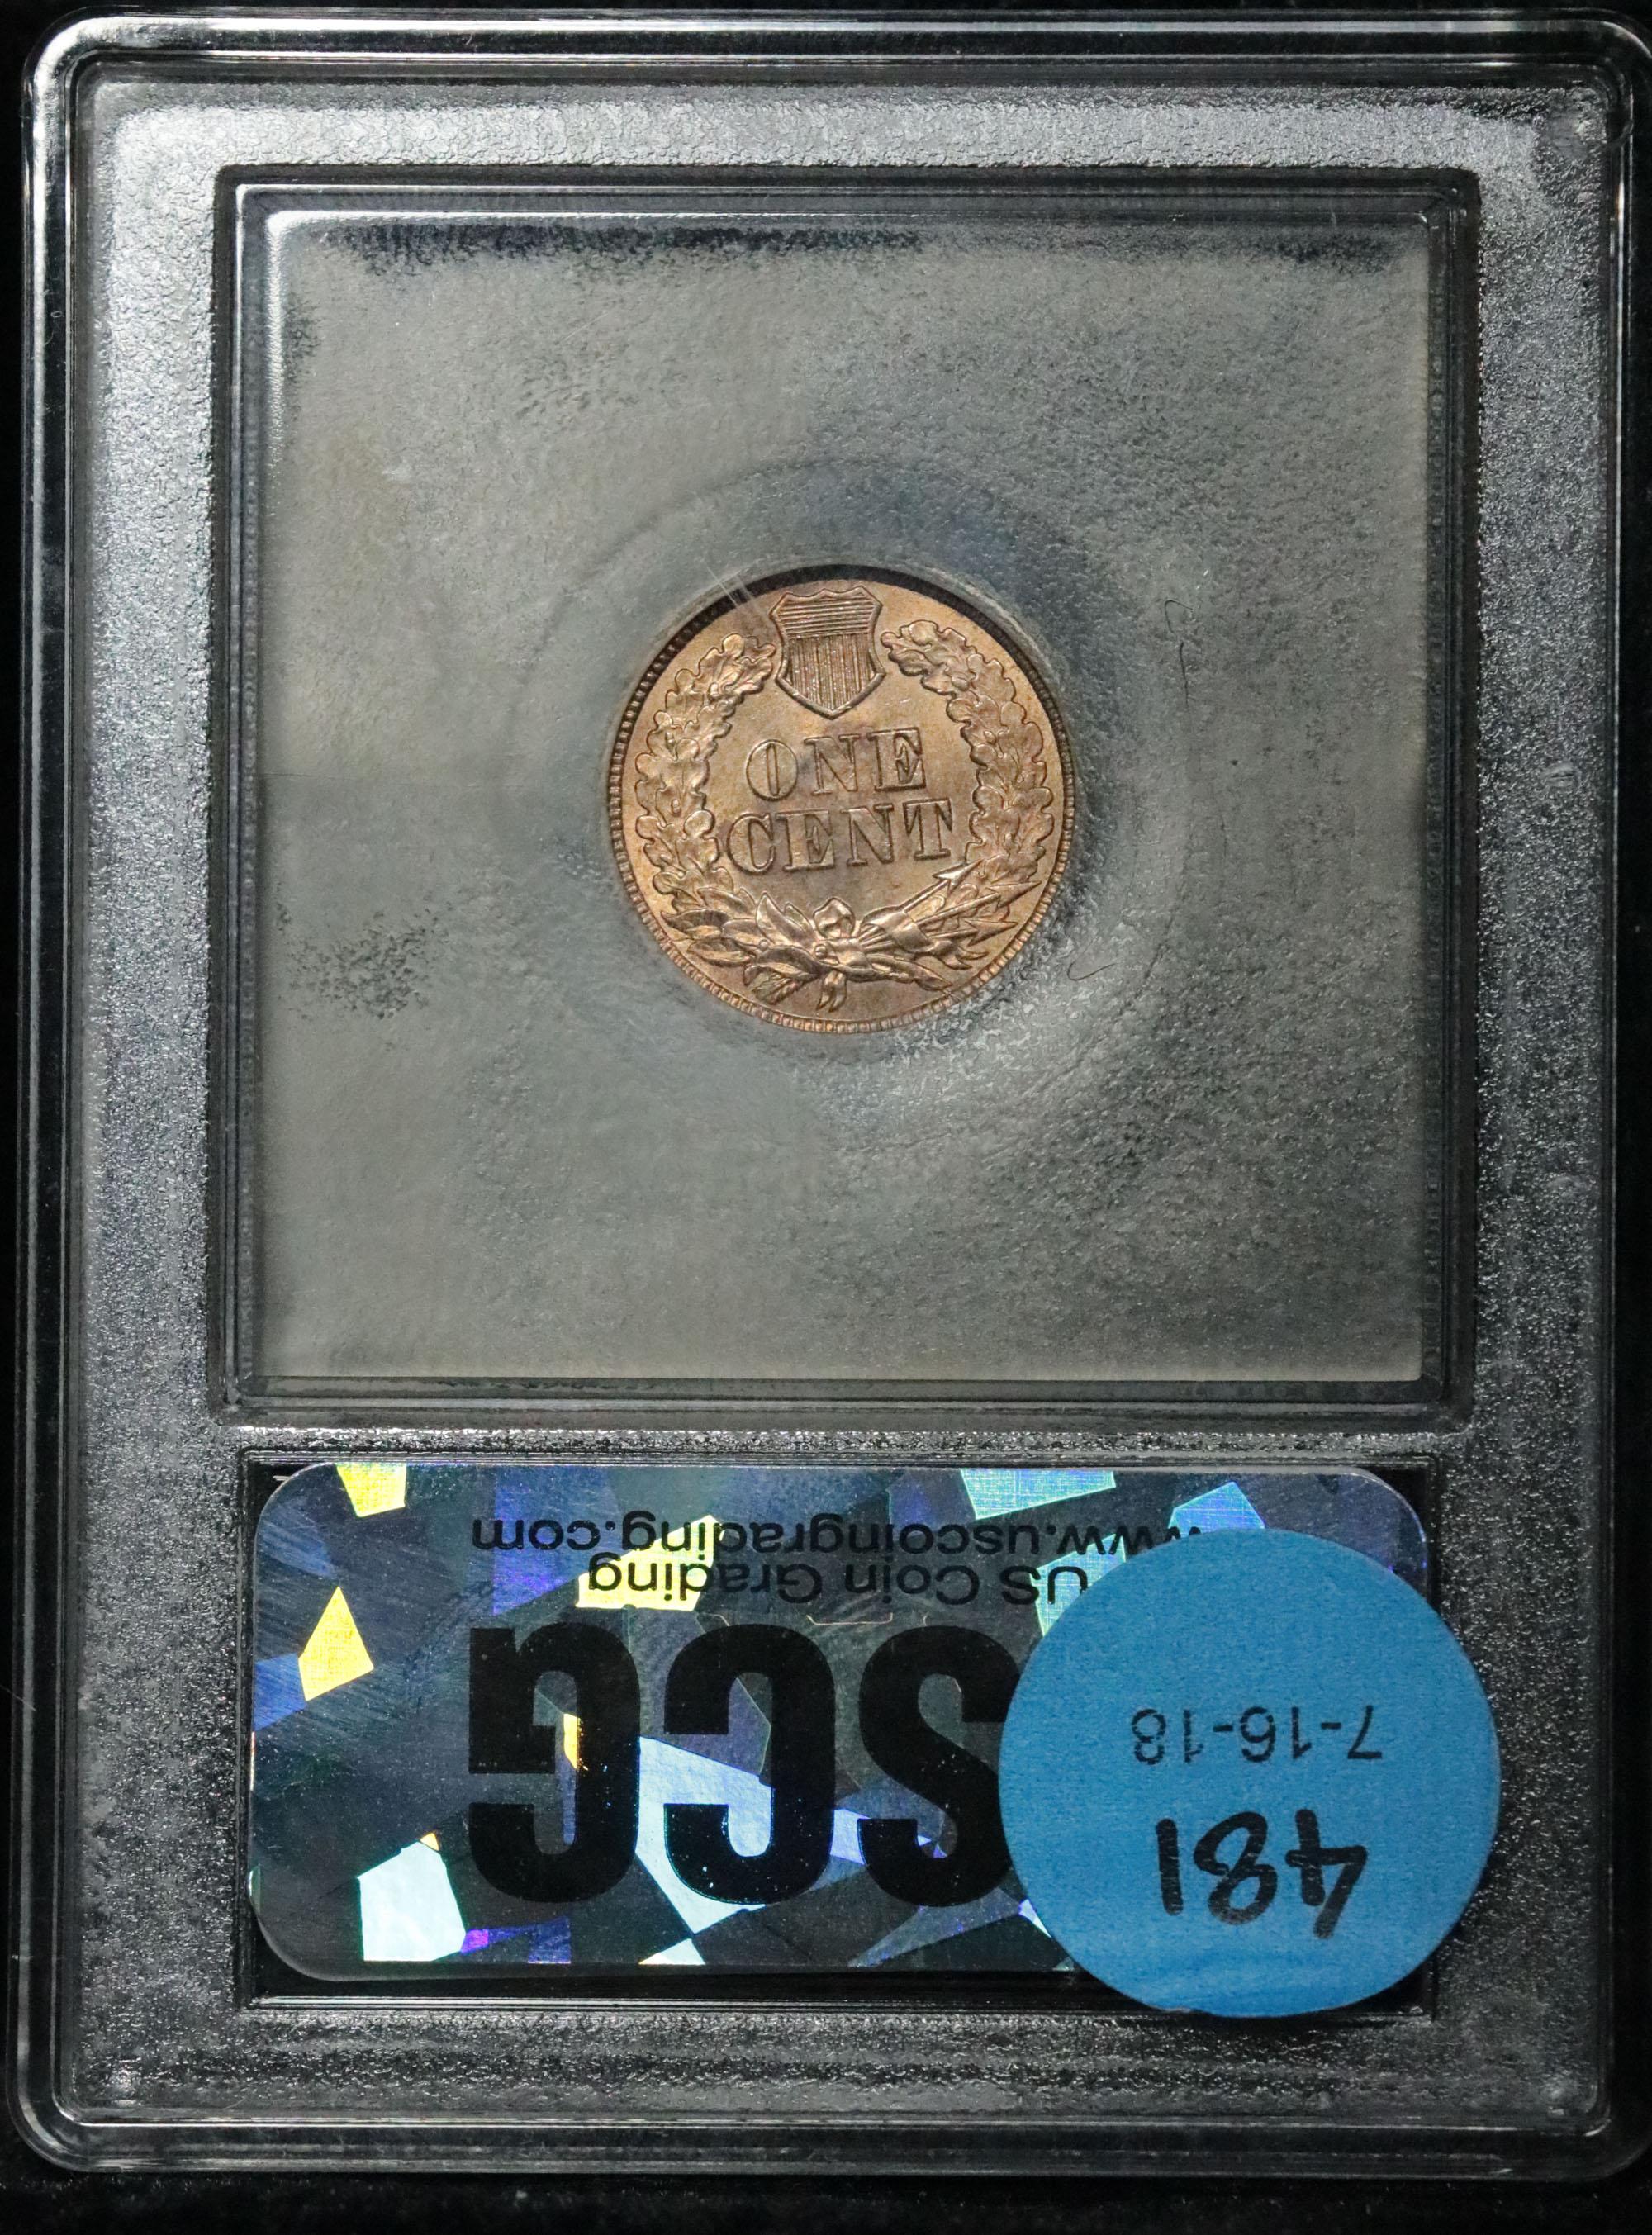 ***Auction Highlight*** 1863 Indian Cent 1c Graded GEM++ Unc by USCG (fc)